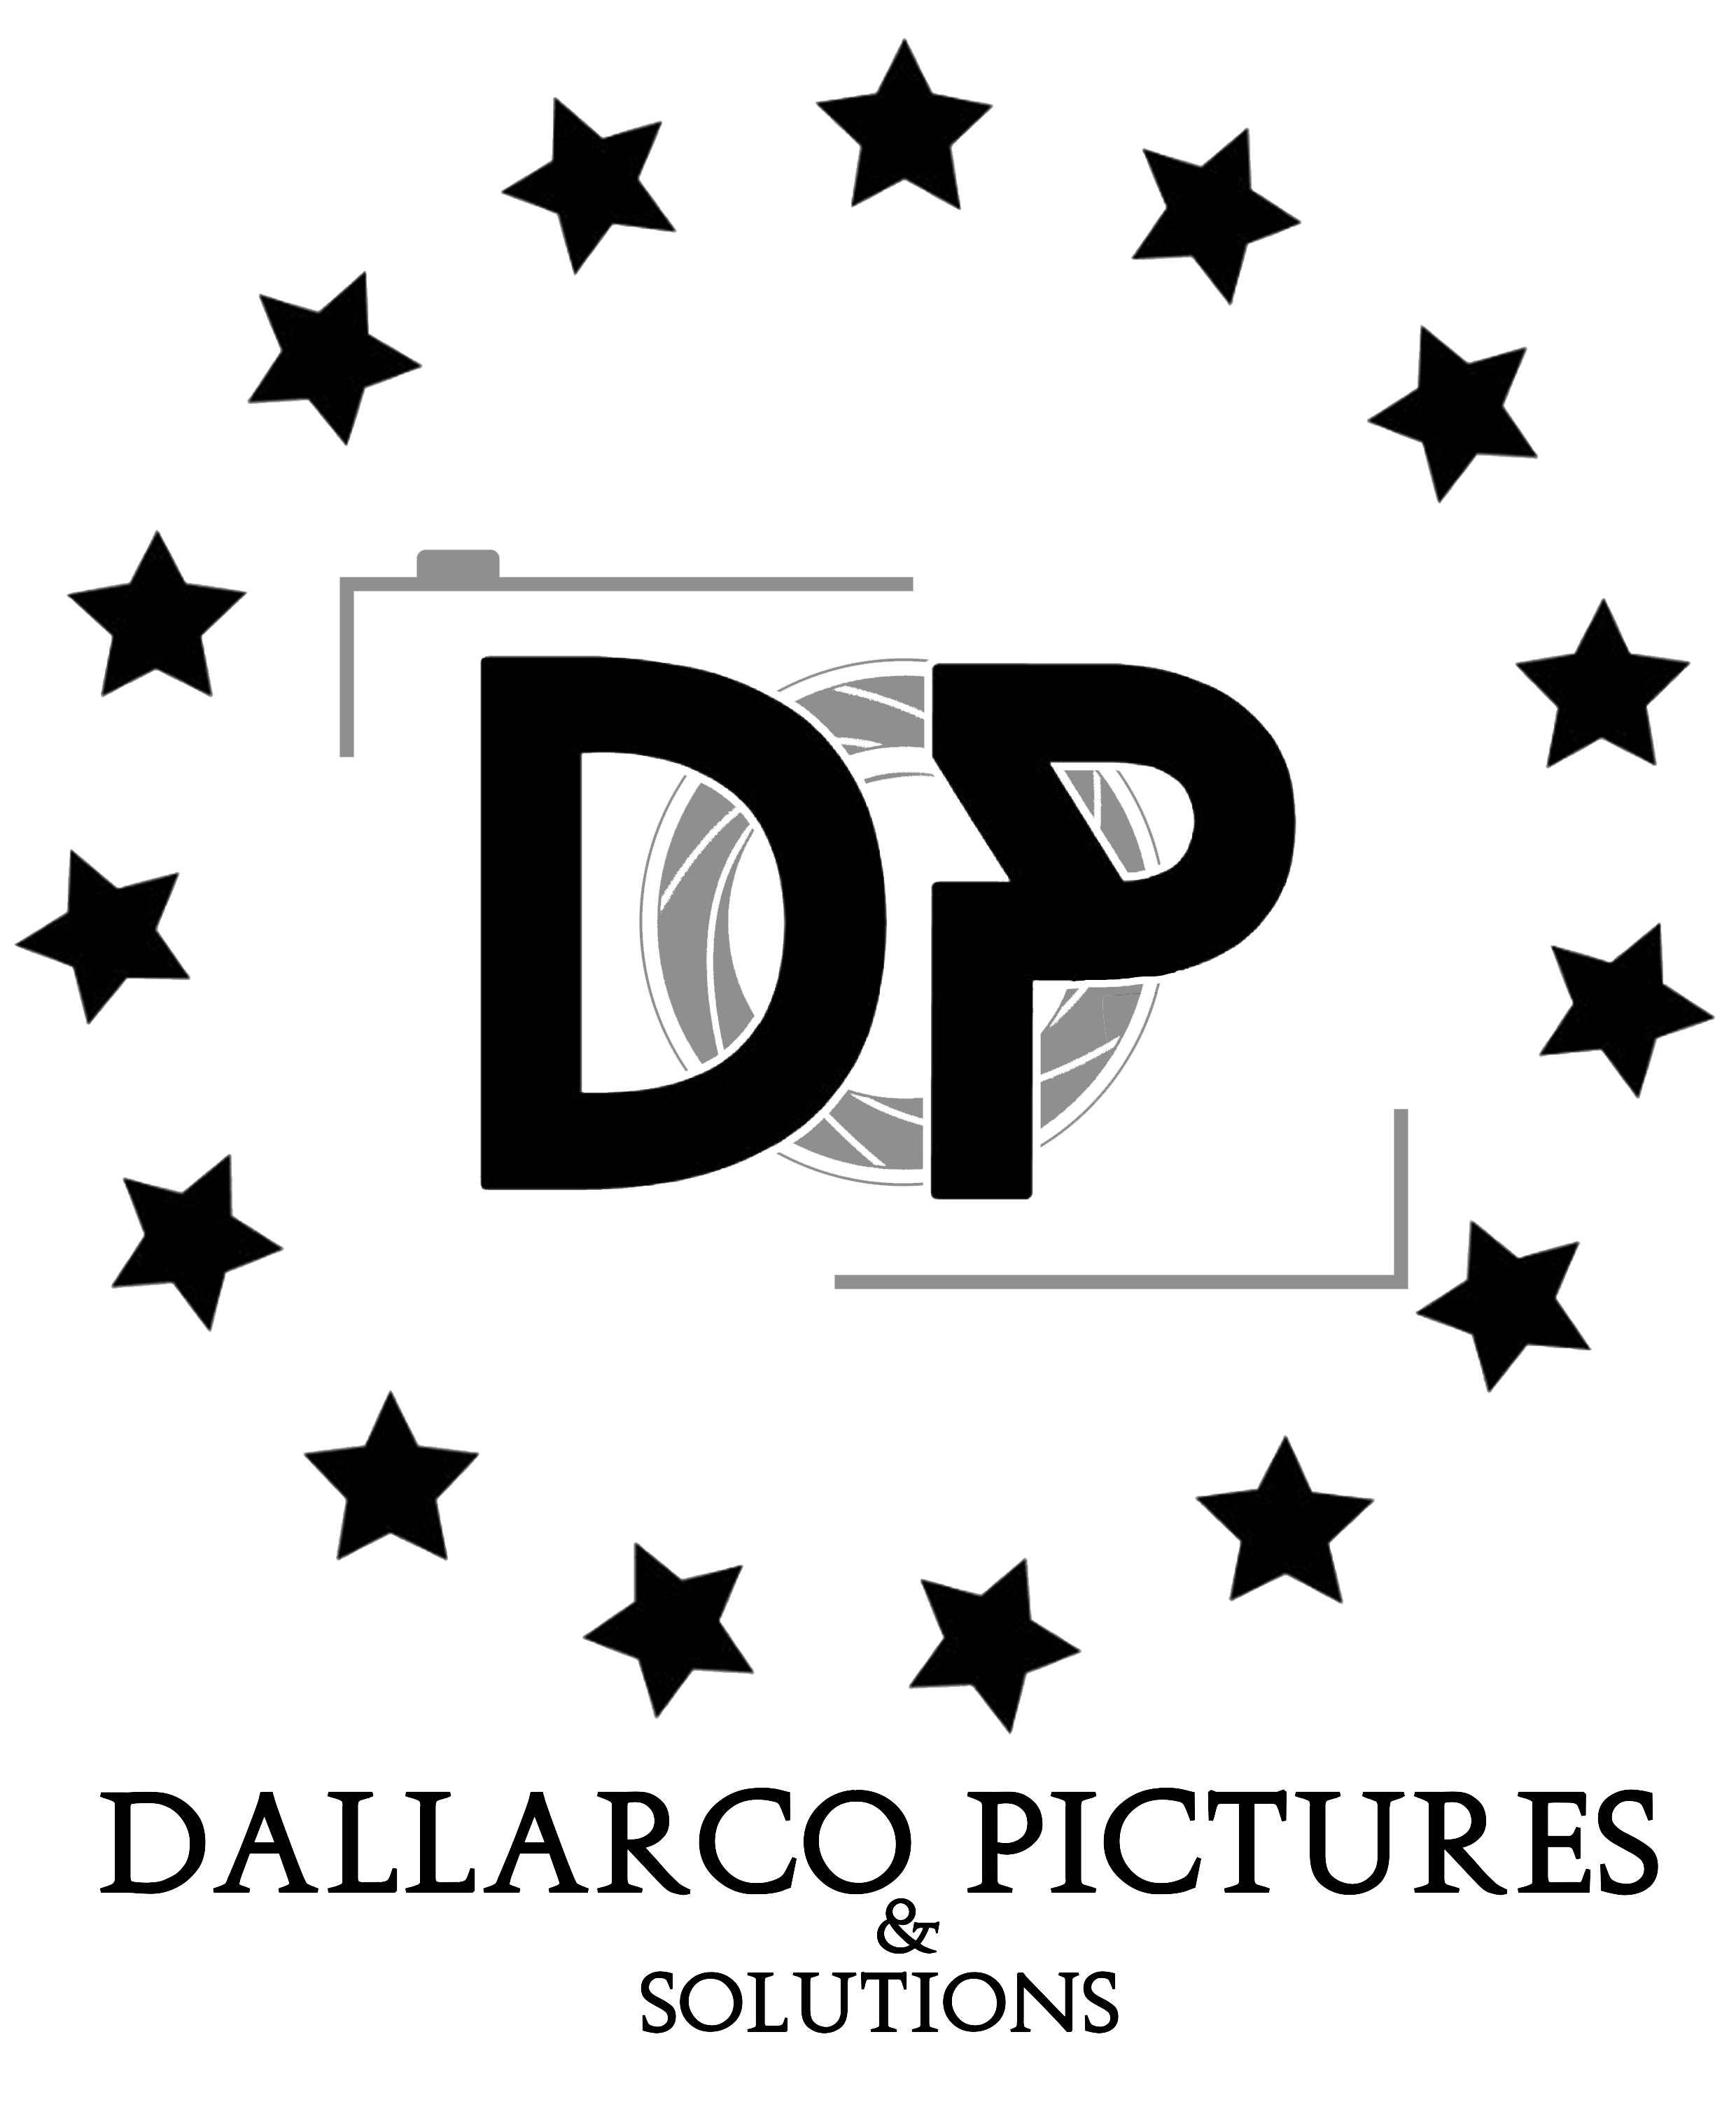 dallarco pictures & solutions